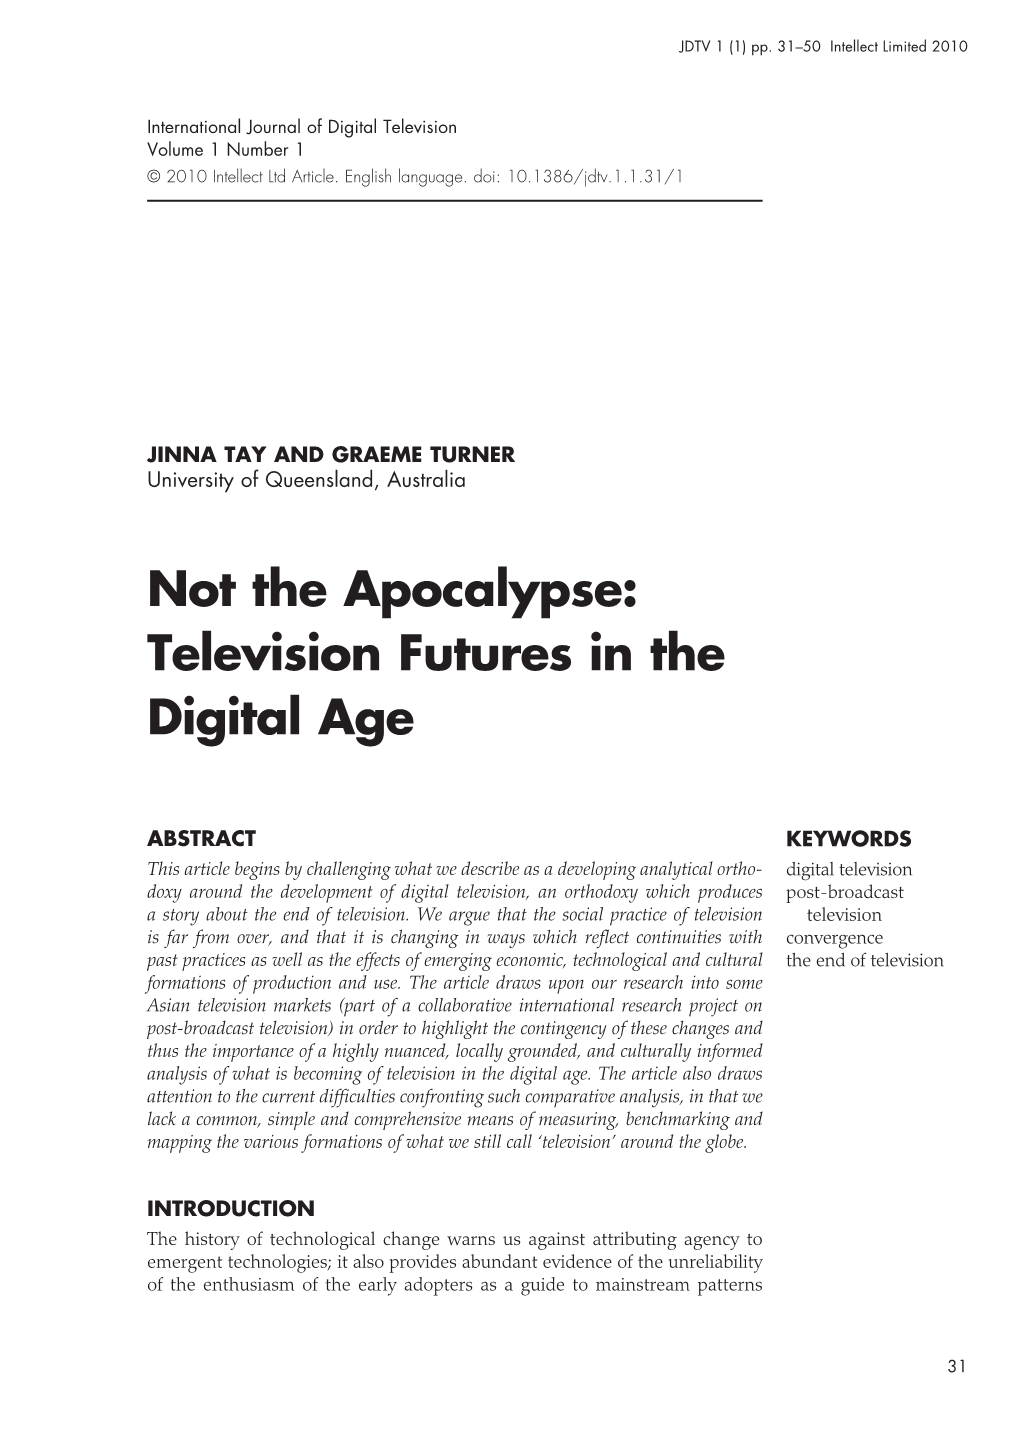 Not the Apocalypse: Television Futures in the Digital Age